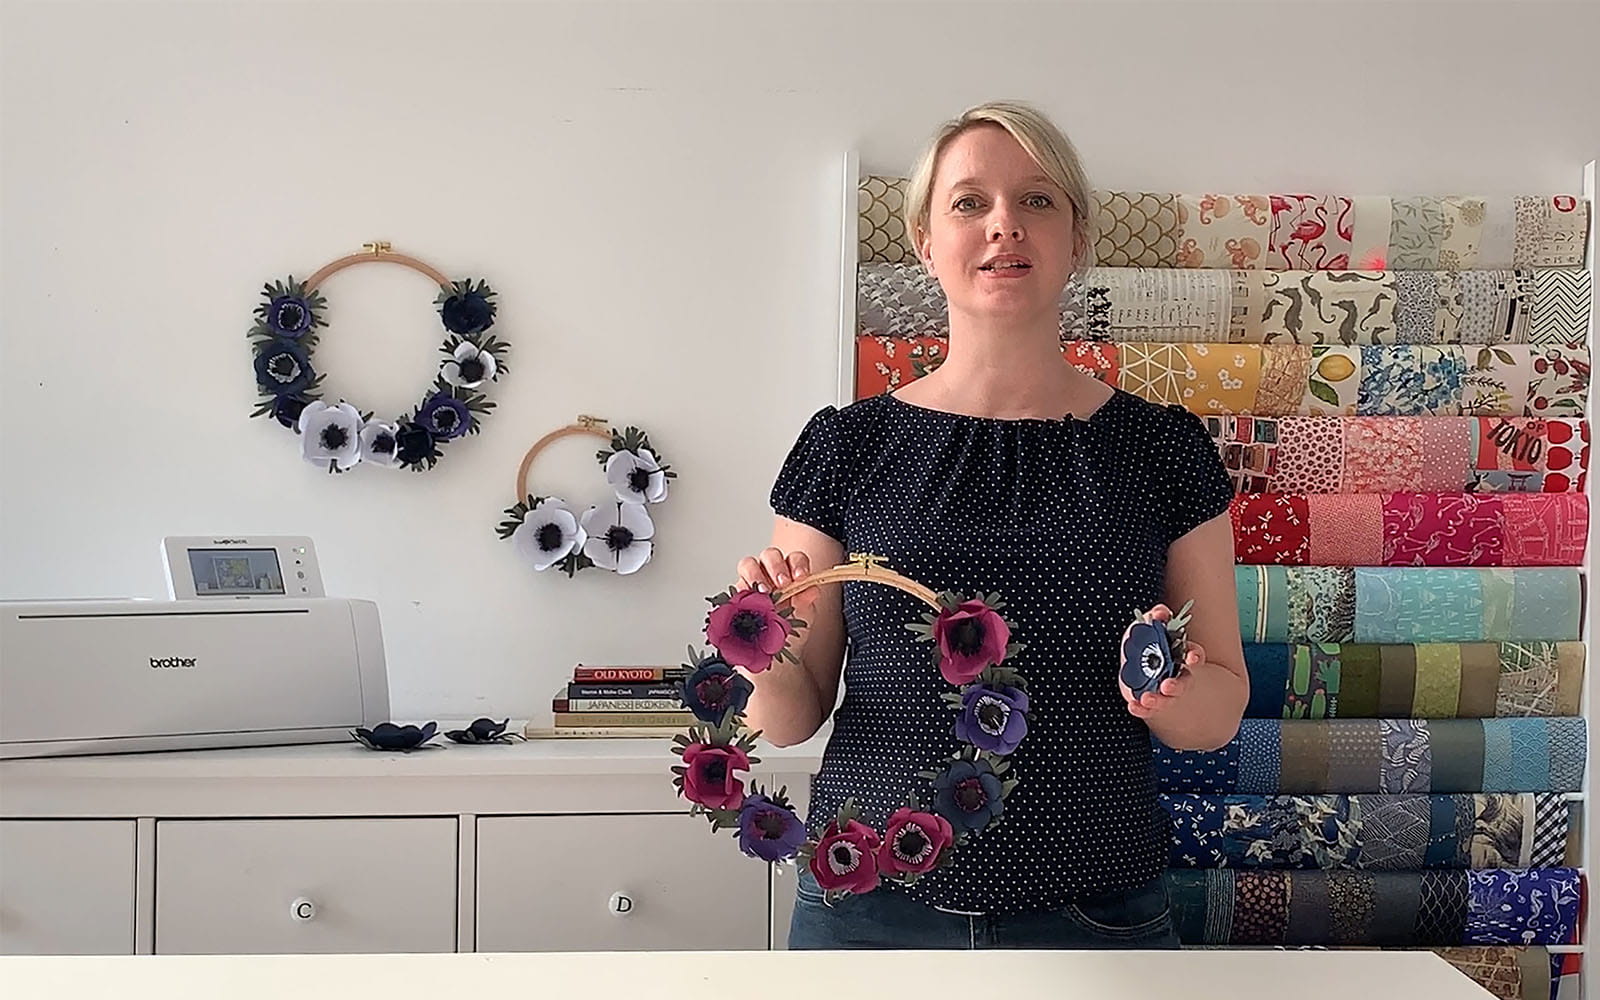 Blonde haired woman standing in craft room with paper flower wreath